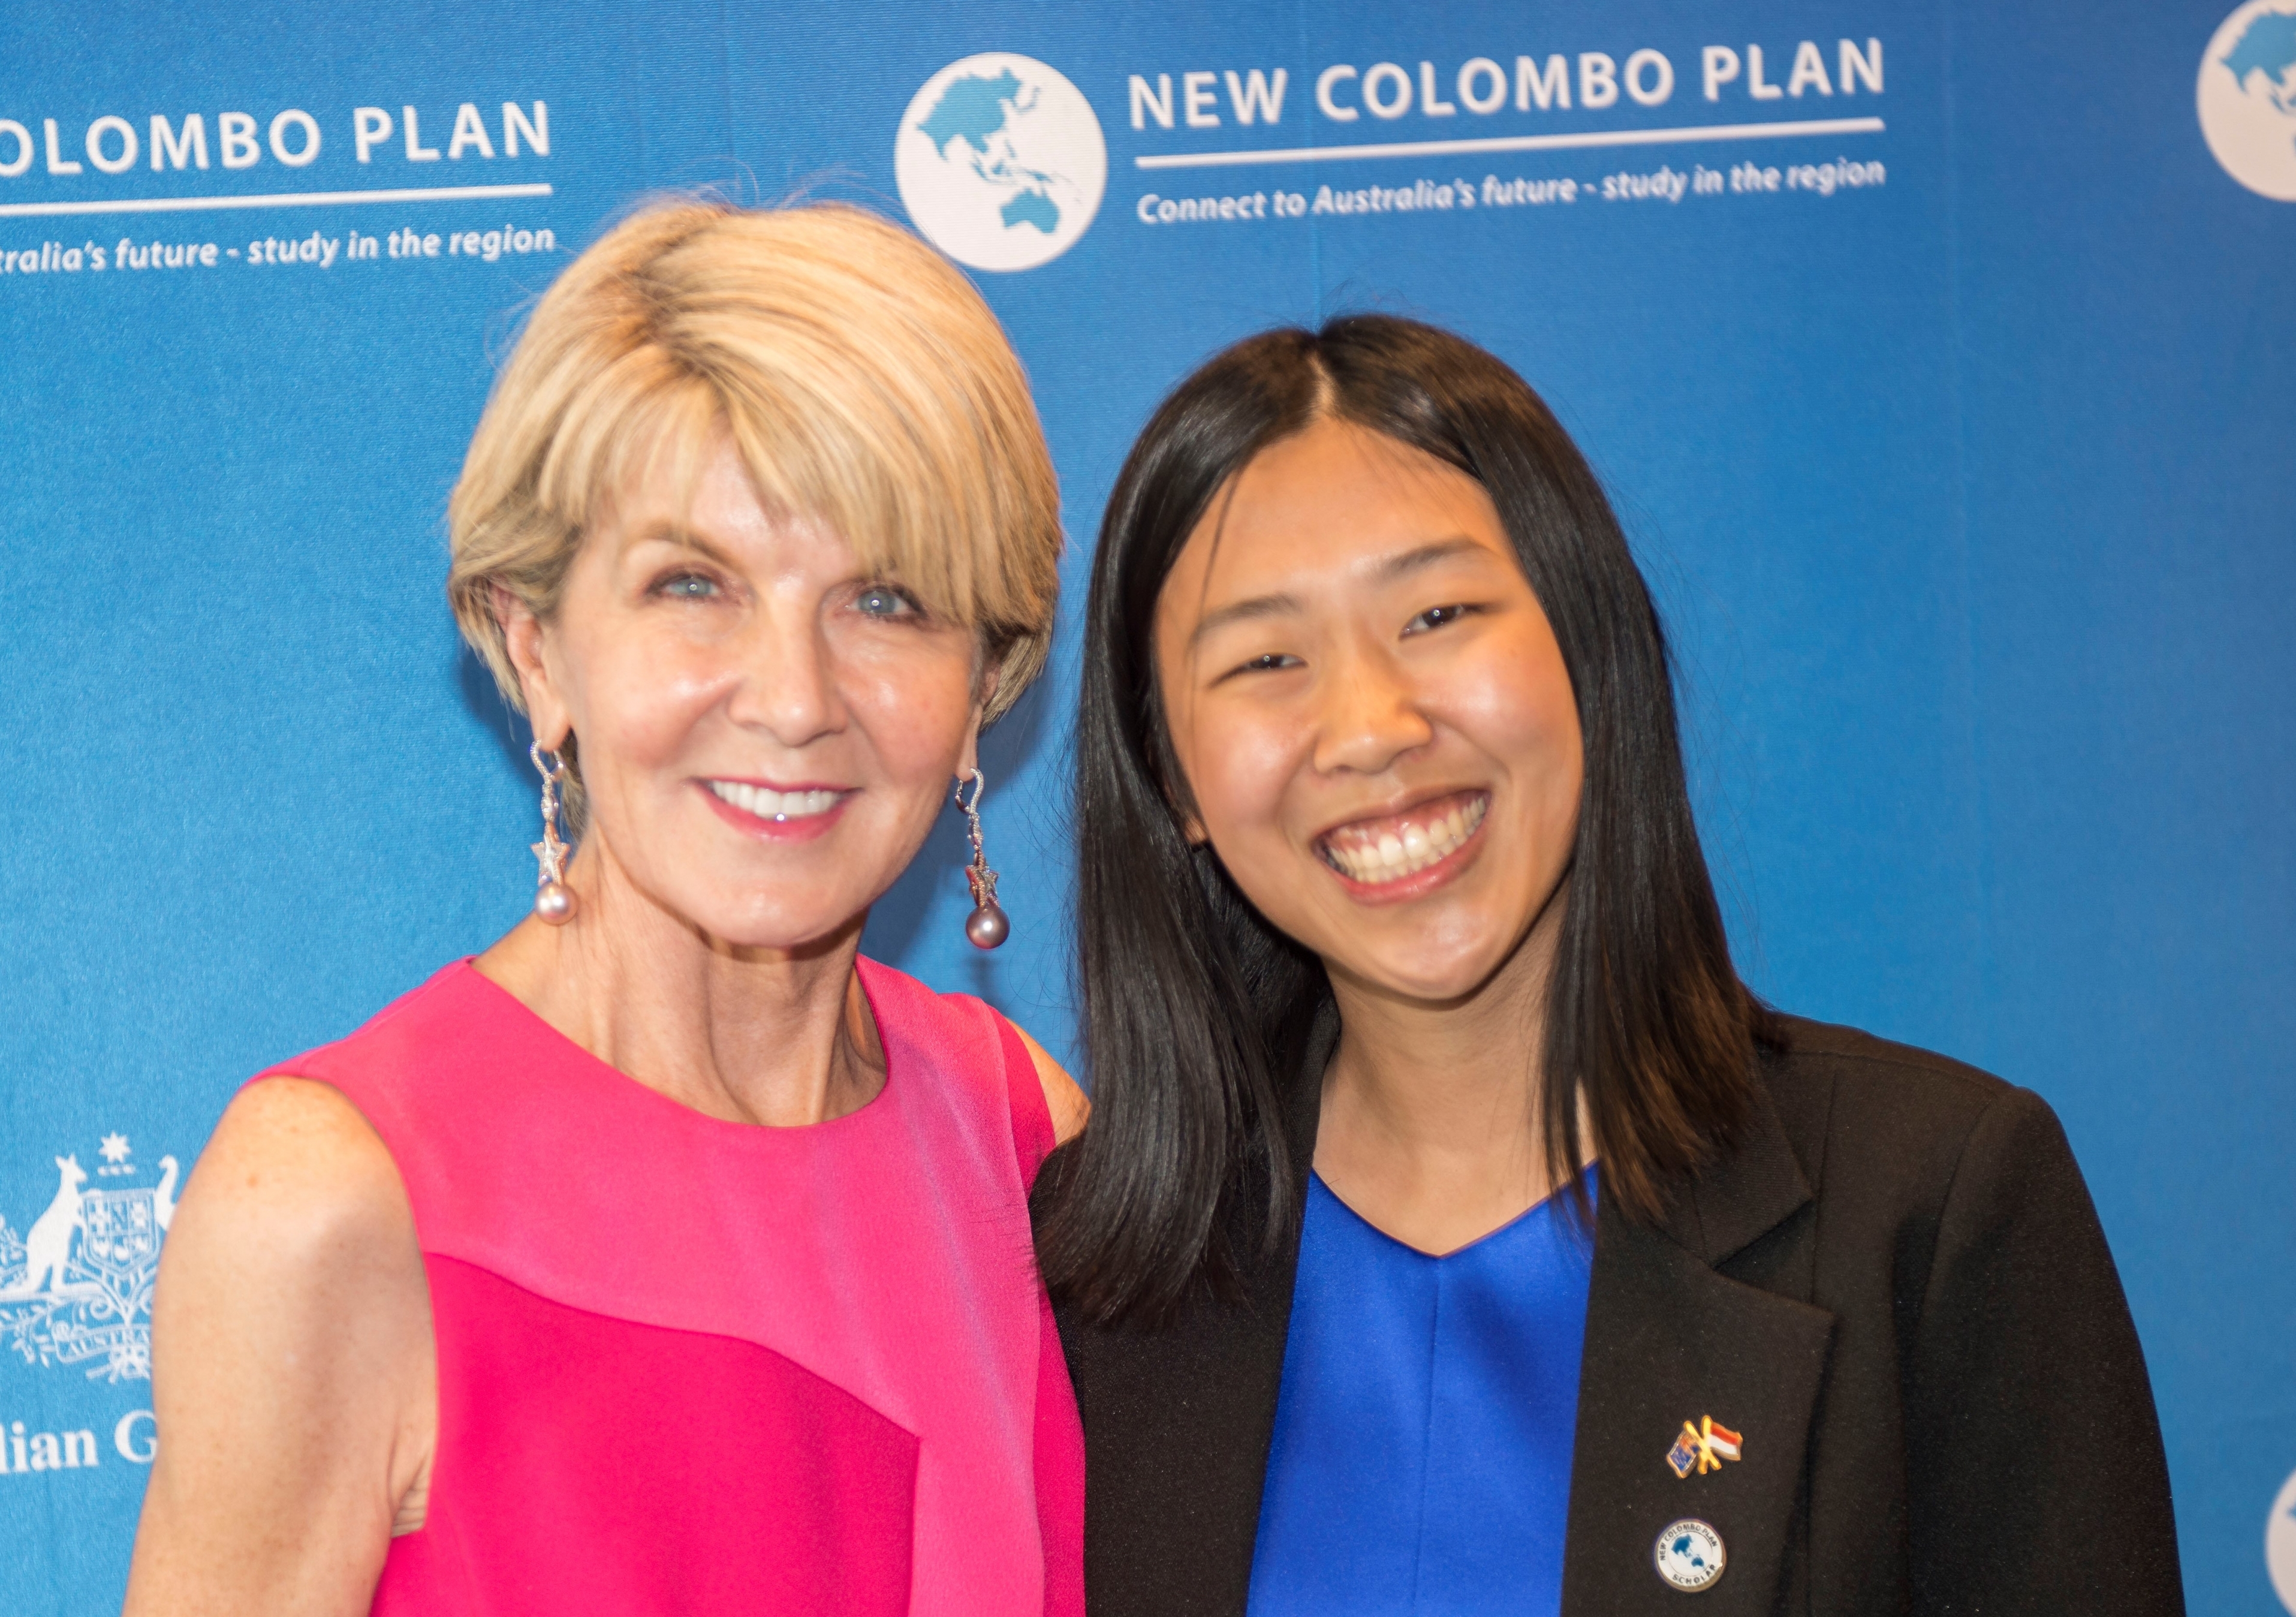 Then-Foreign Affairs Minister Julie Bishop with Jessica Cong at New Colombo Plan Scholarship award ceremony in 2018.